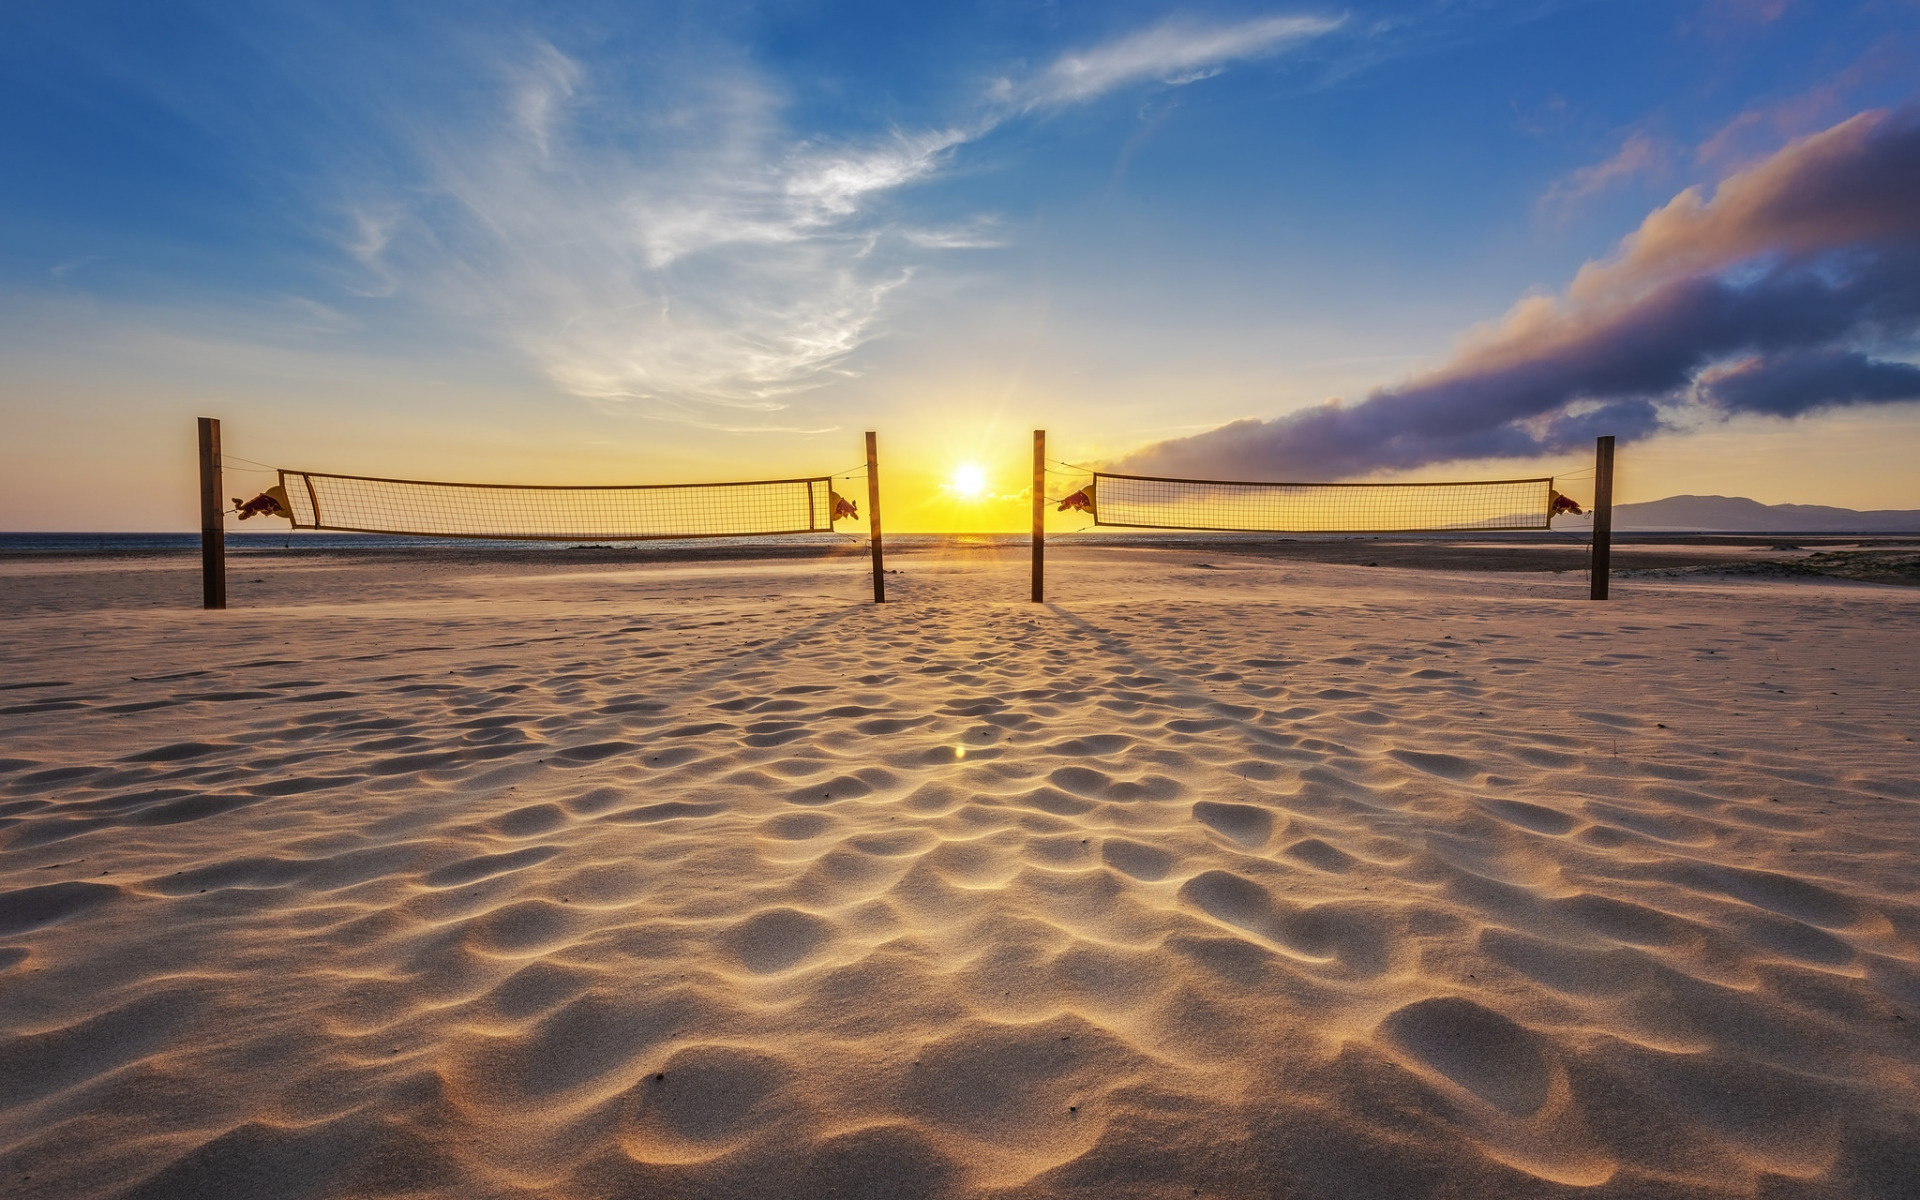 Beach Volleyball: Volleyball Game, Volleyball Net In Sunset Lights, Section Sports. 1920x1200 HD Wallpaper.